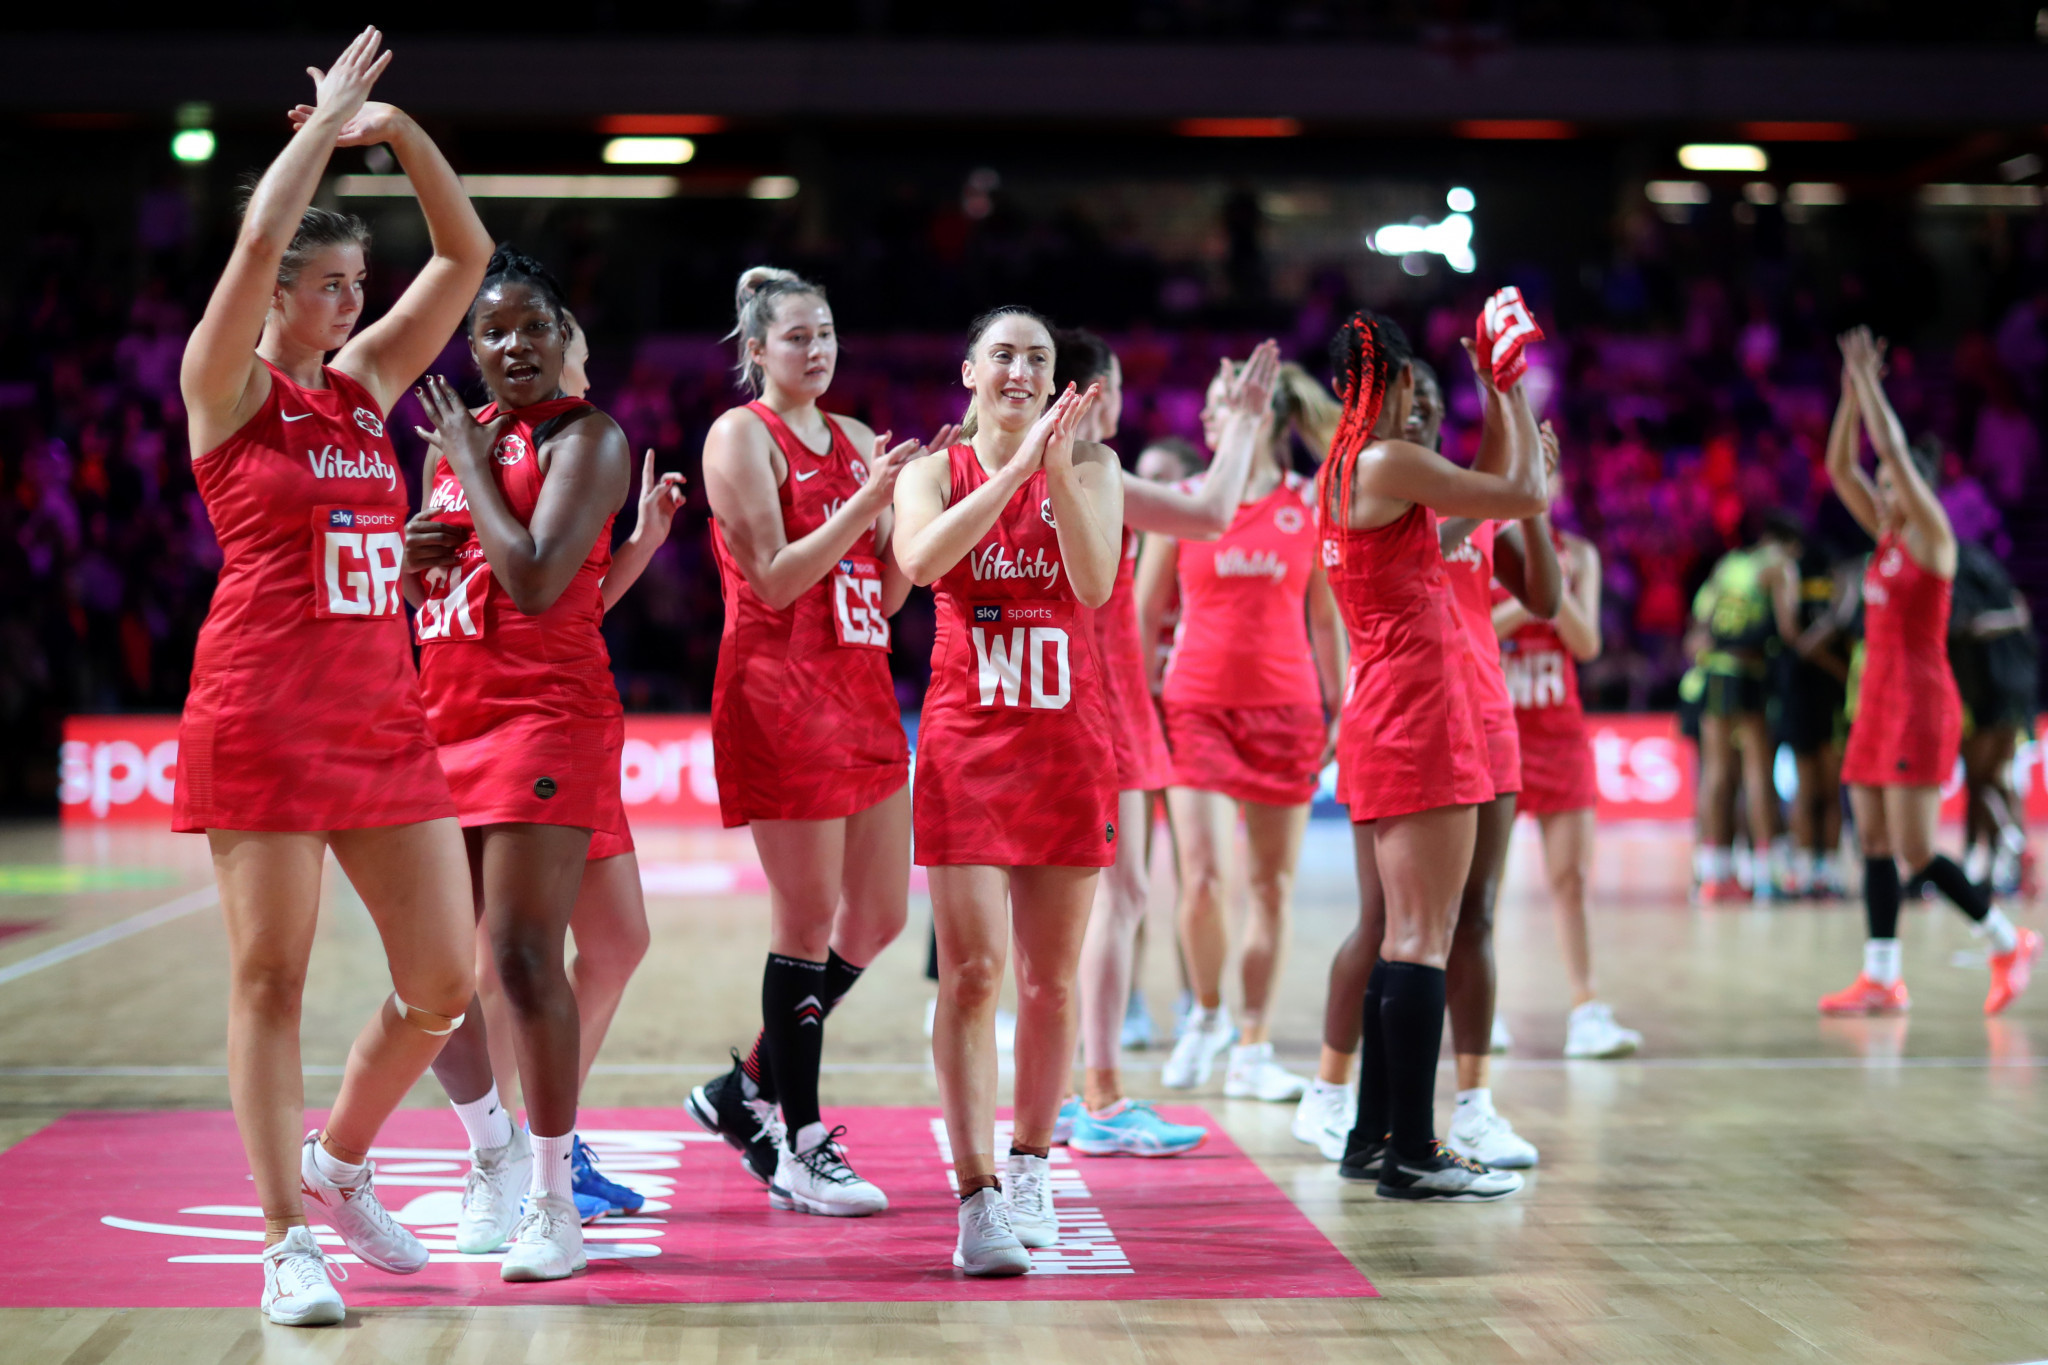 England lost to Jamaica in the last encounter at the Vitality Netball Nations Cup in January 2020 ©Getty Images